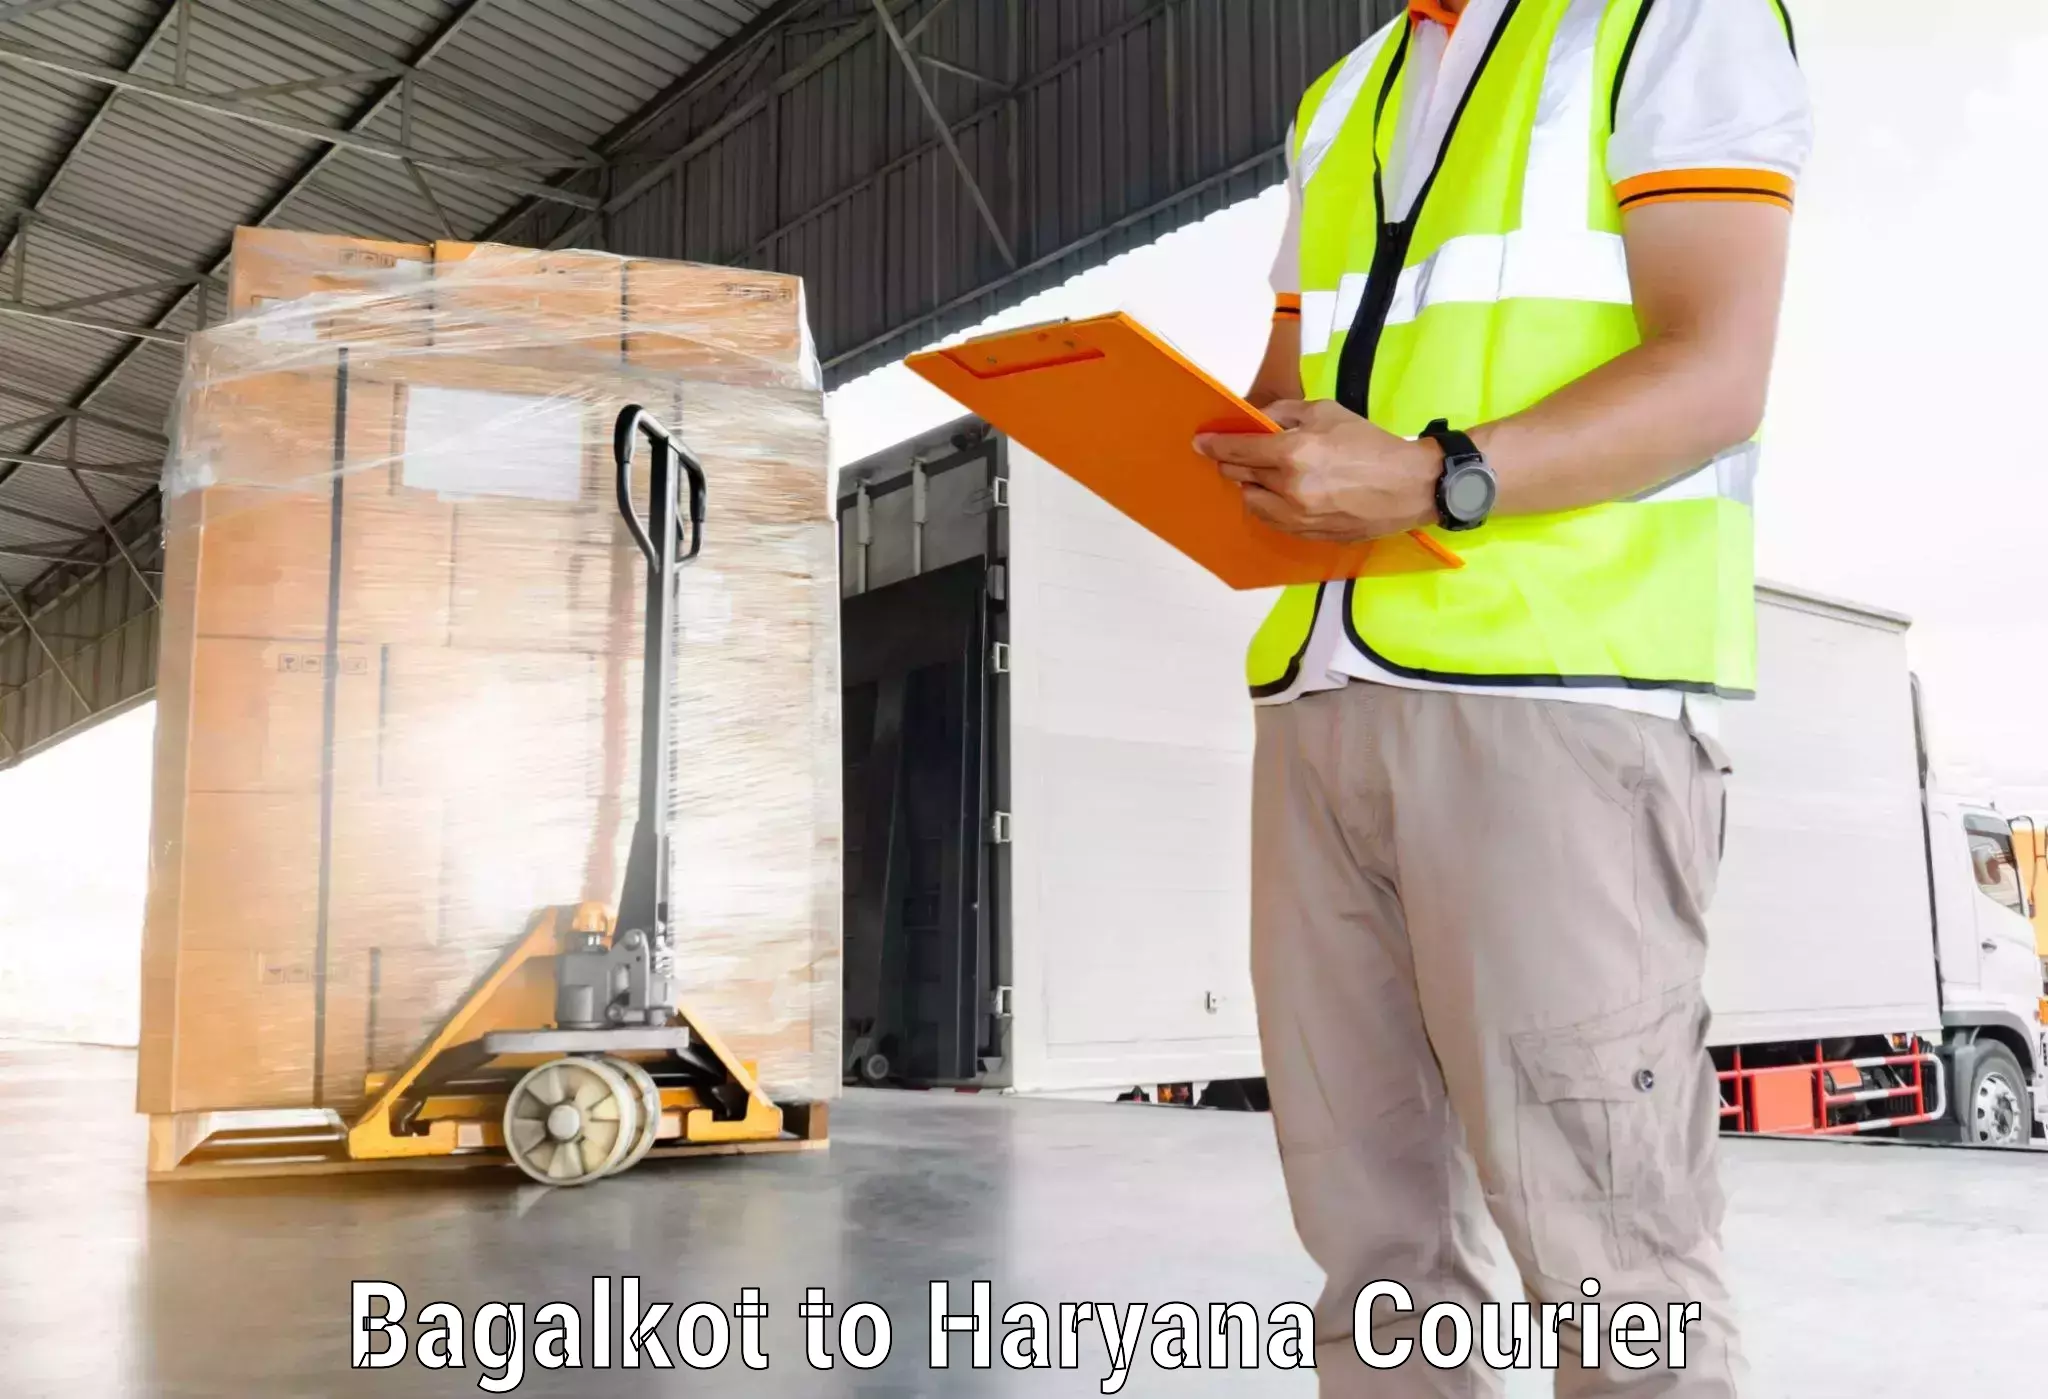 Courier service innovation Bagalkot to Faridabad